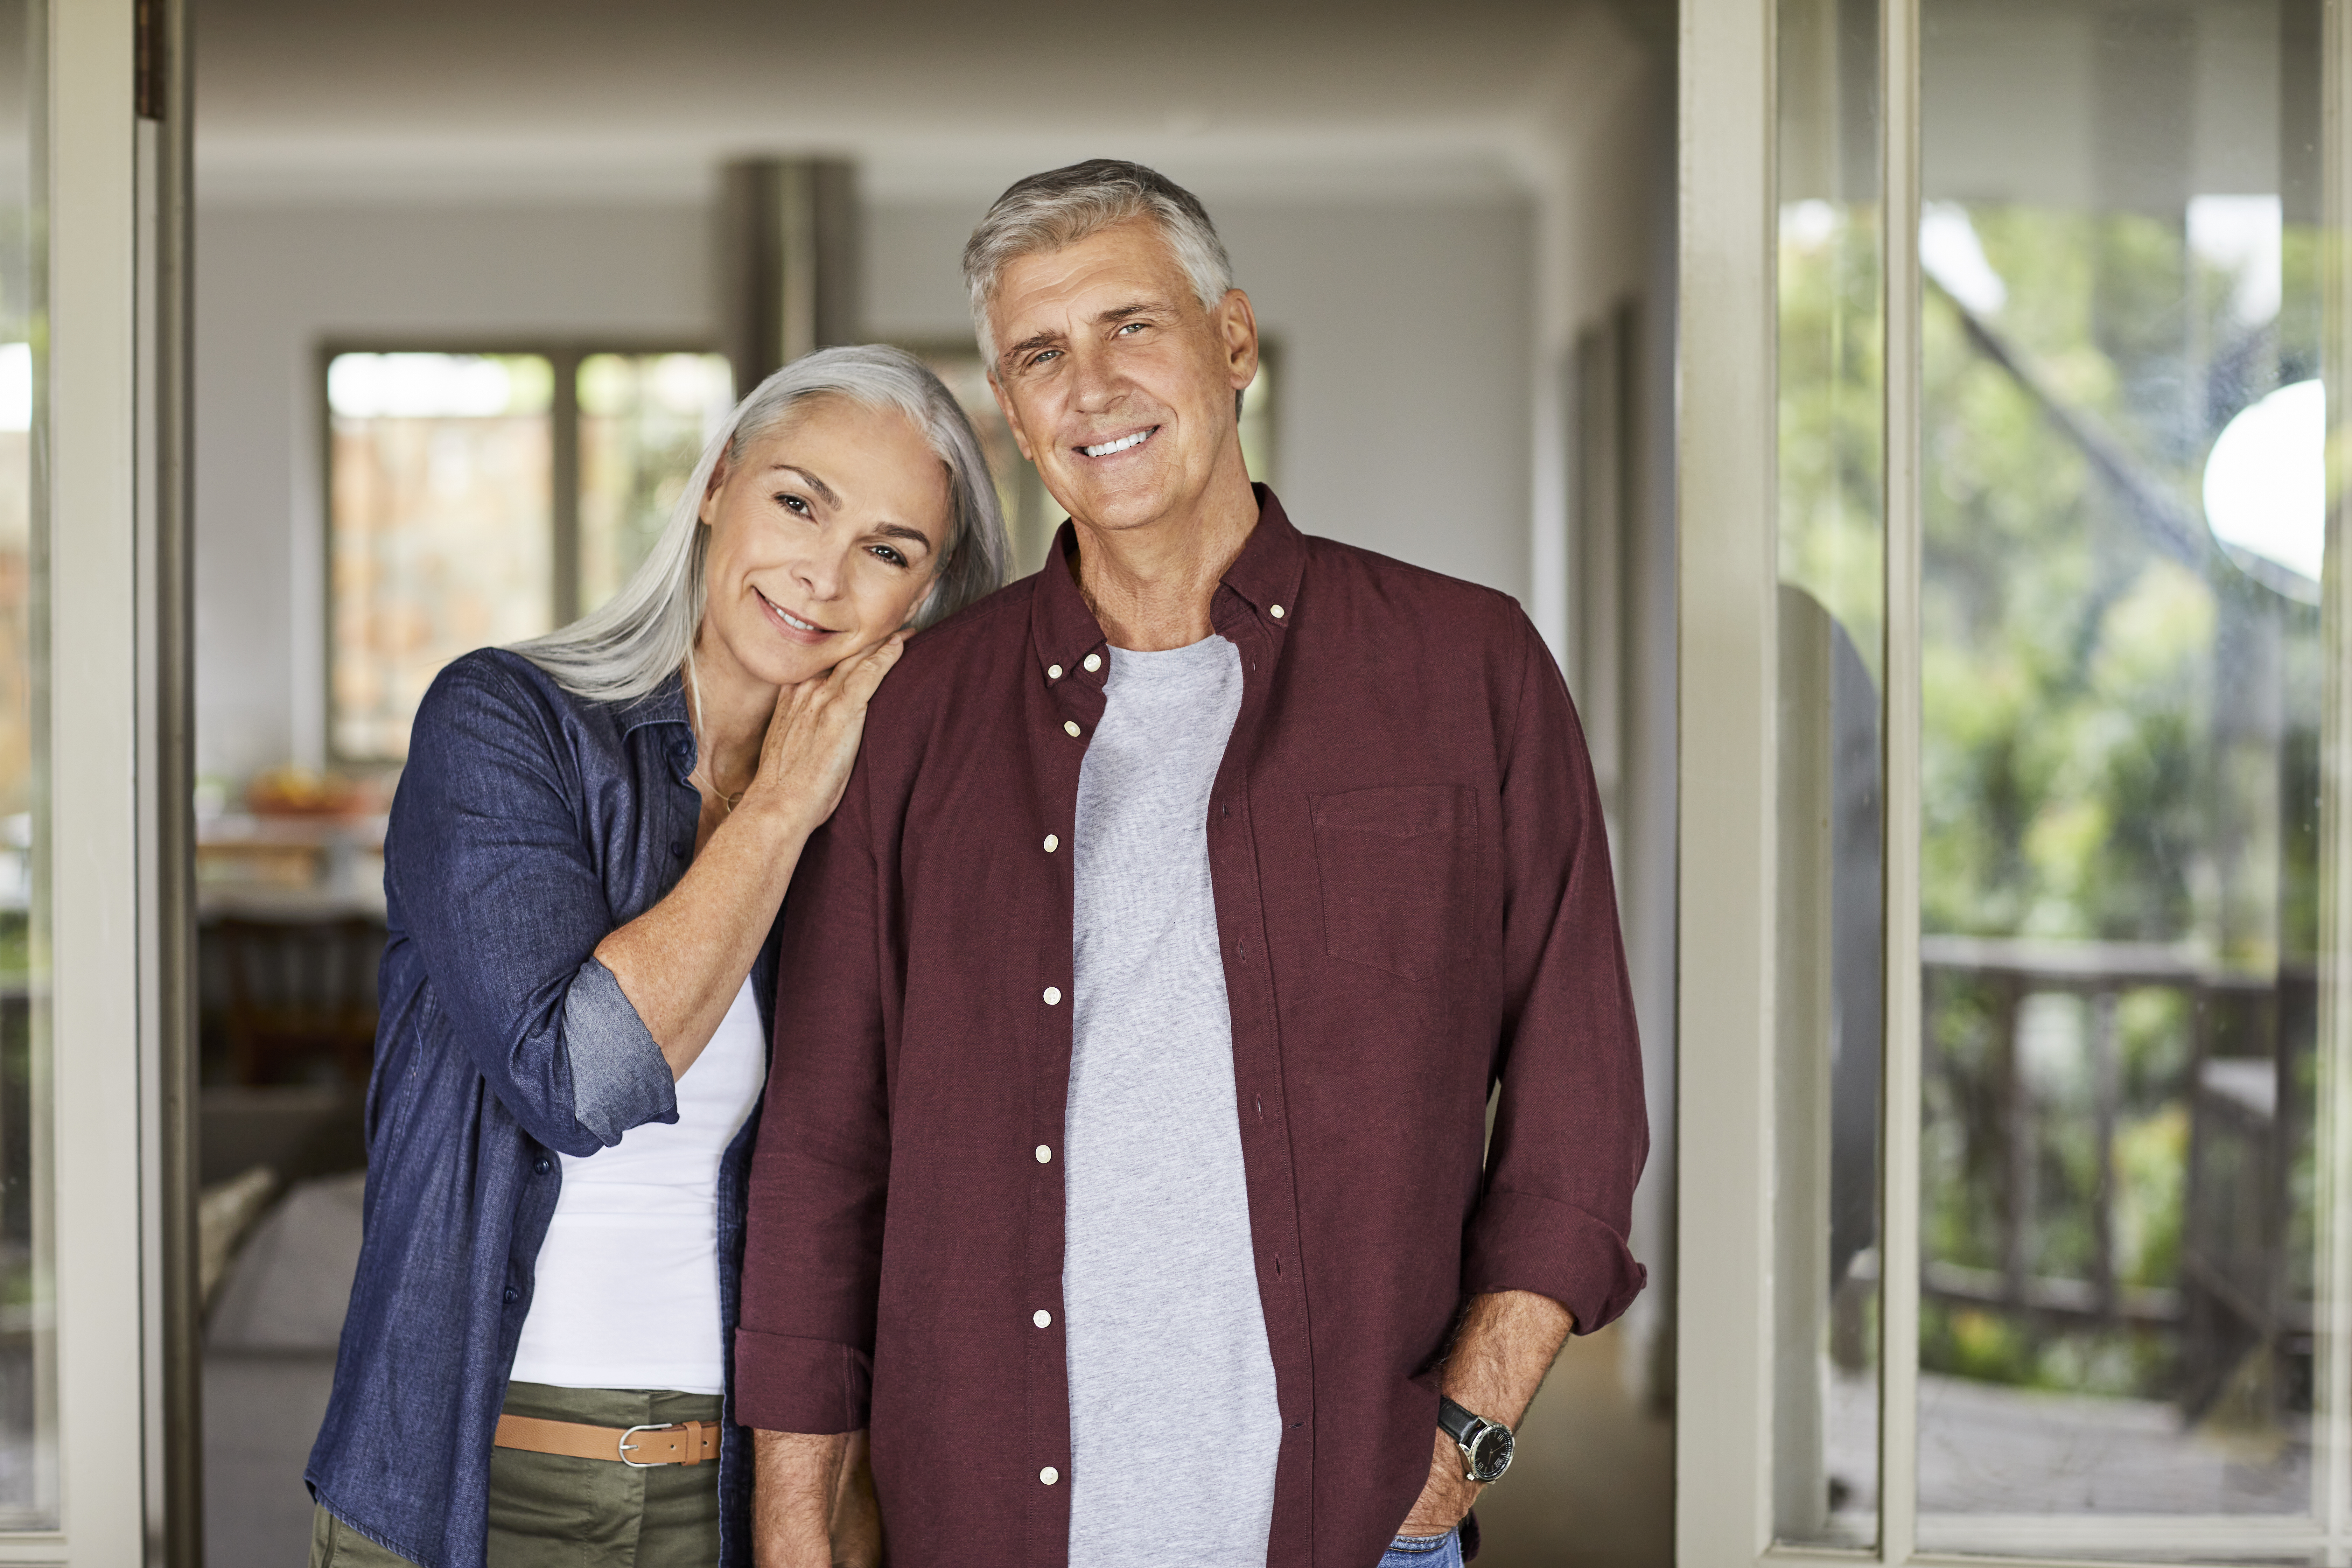 Smiling mature couple at home during lockdown | Source: Getty Images